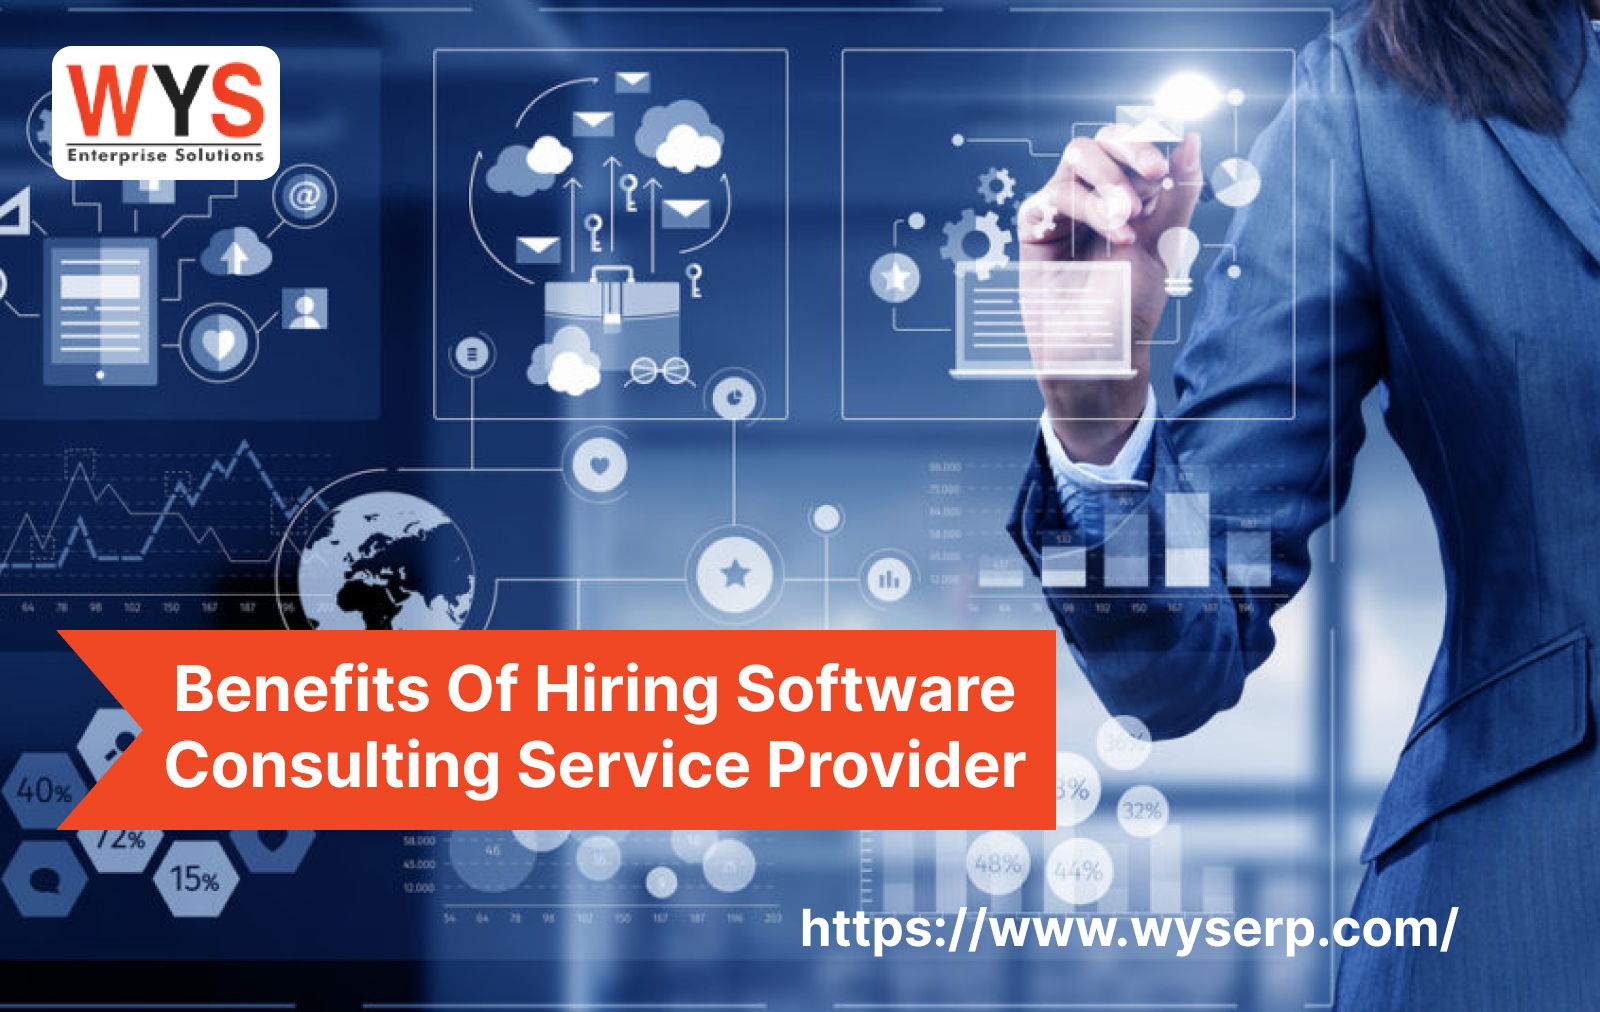 What Are The Benefits Of Hiring Software Consulting Service Provider